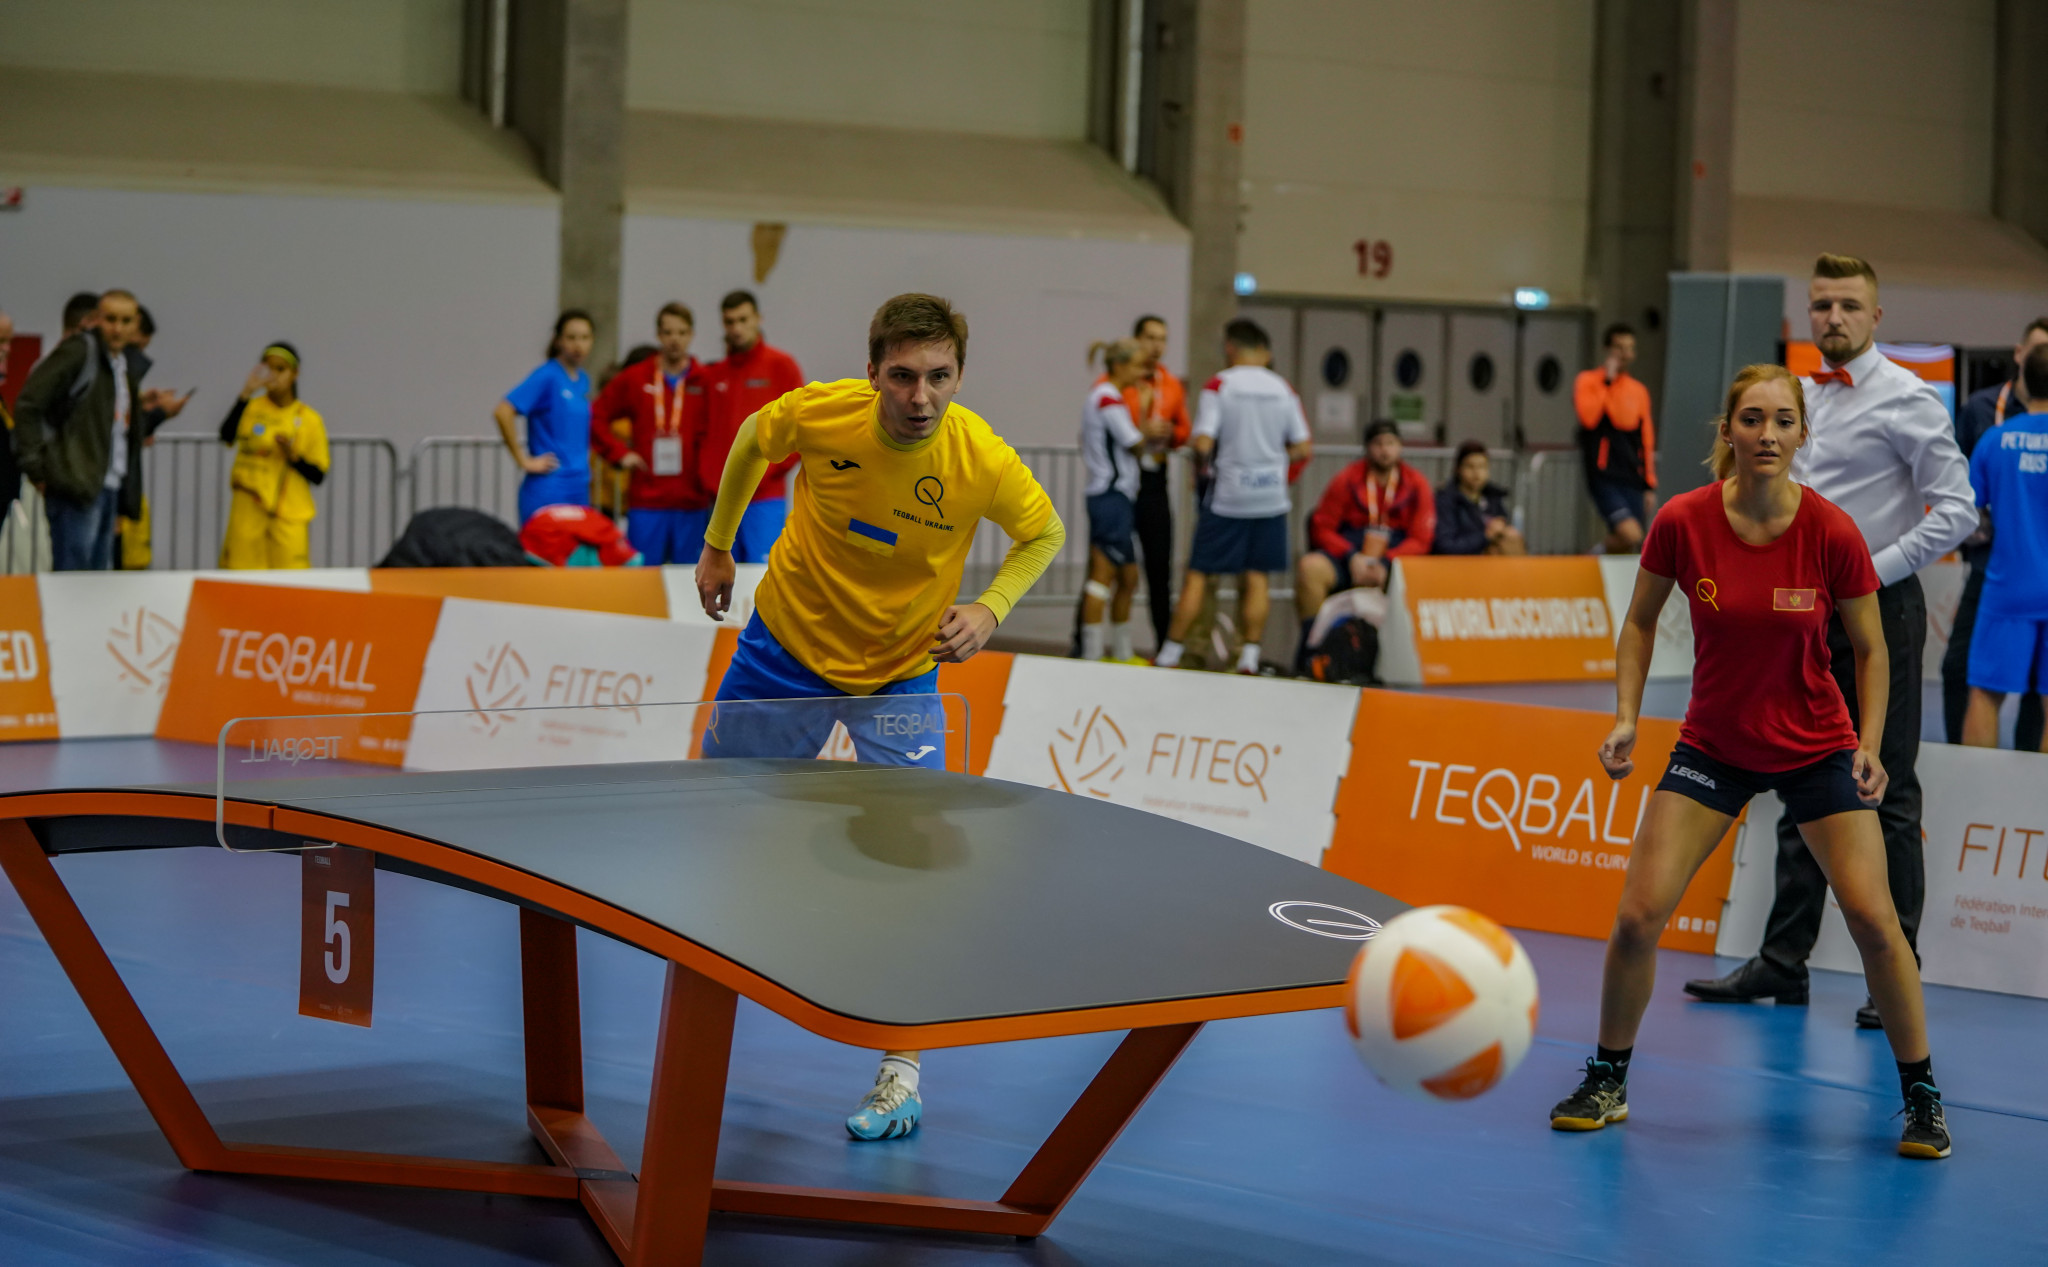 The knockout stages of the World Championships took place earlier in the day ©FITEQ